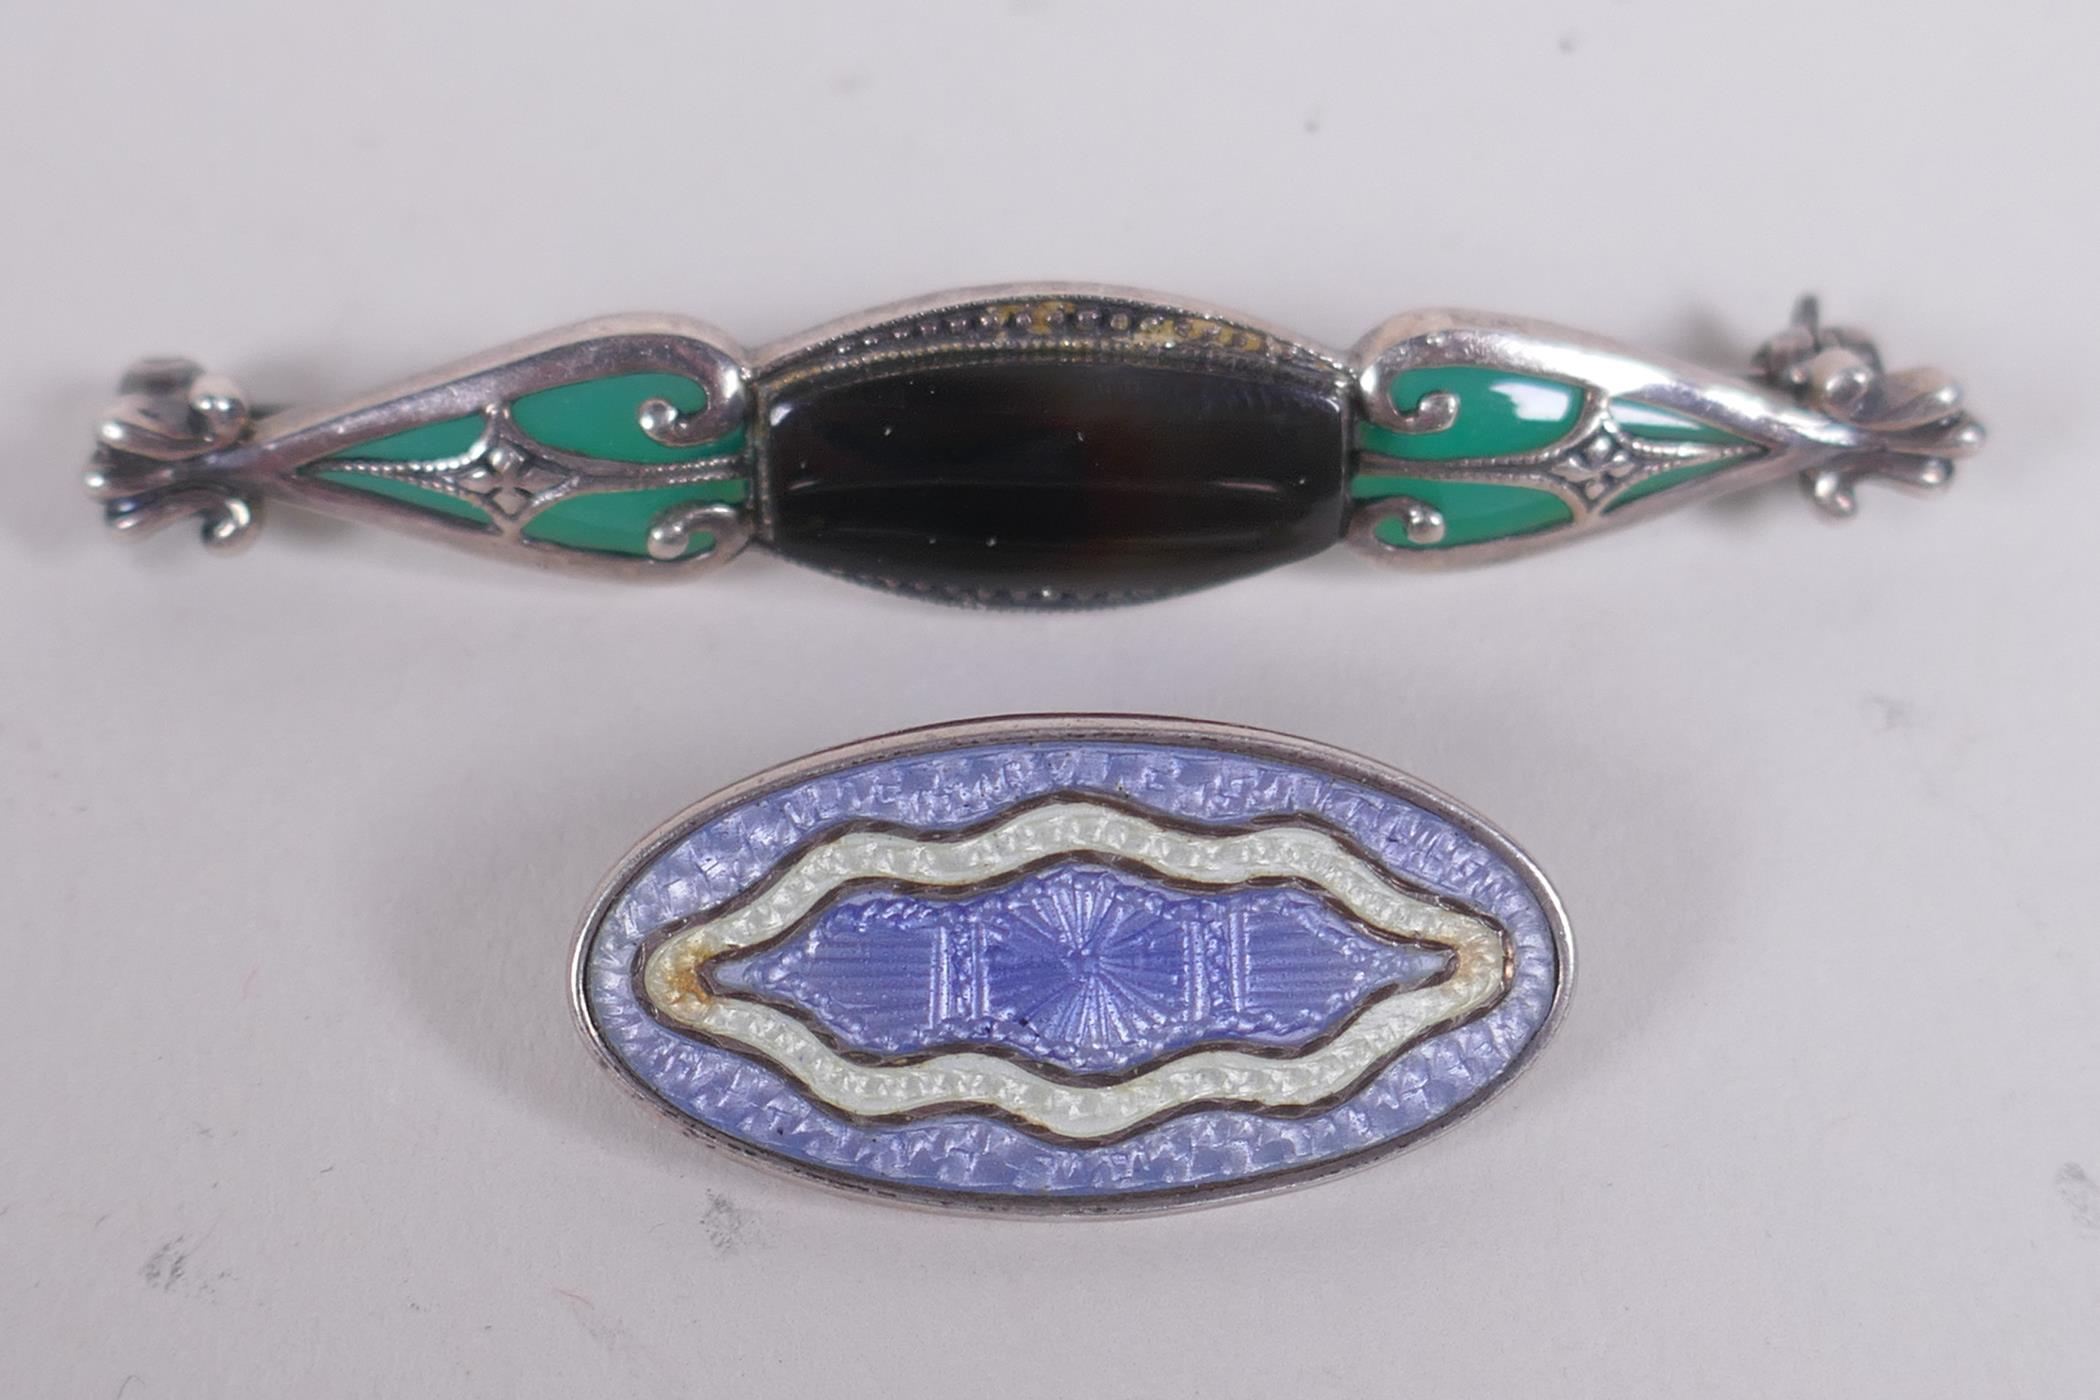 A vintage sterling silver and guilloche enamel oval brooch, and a vintage 925 silver and stone set